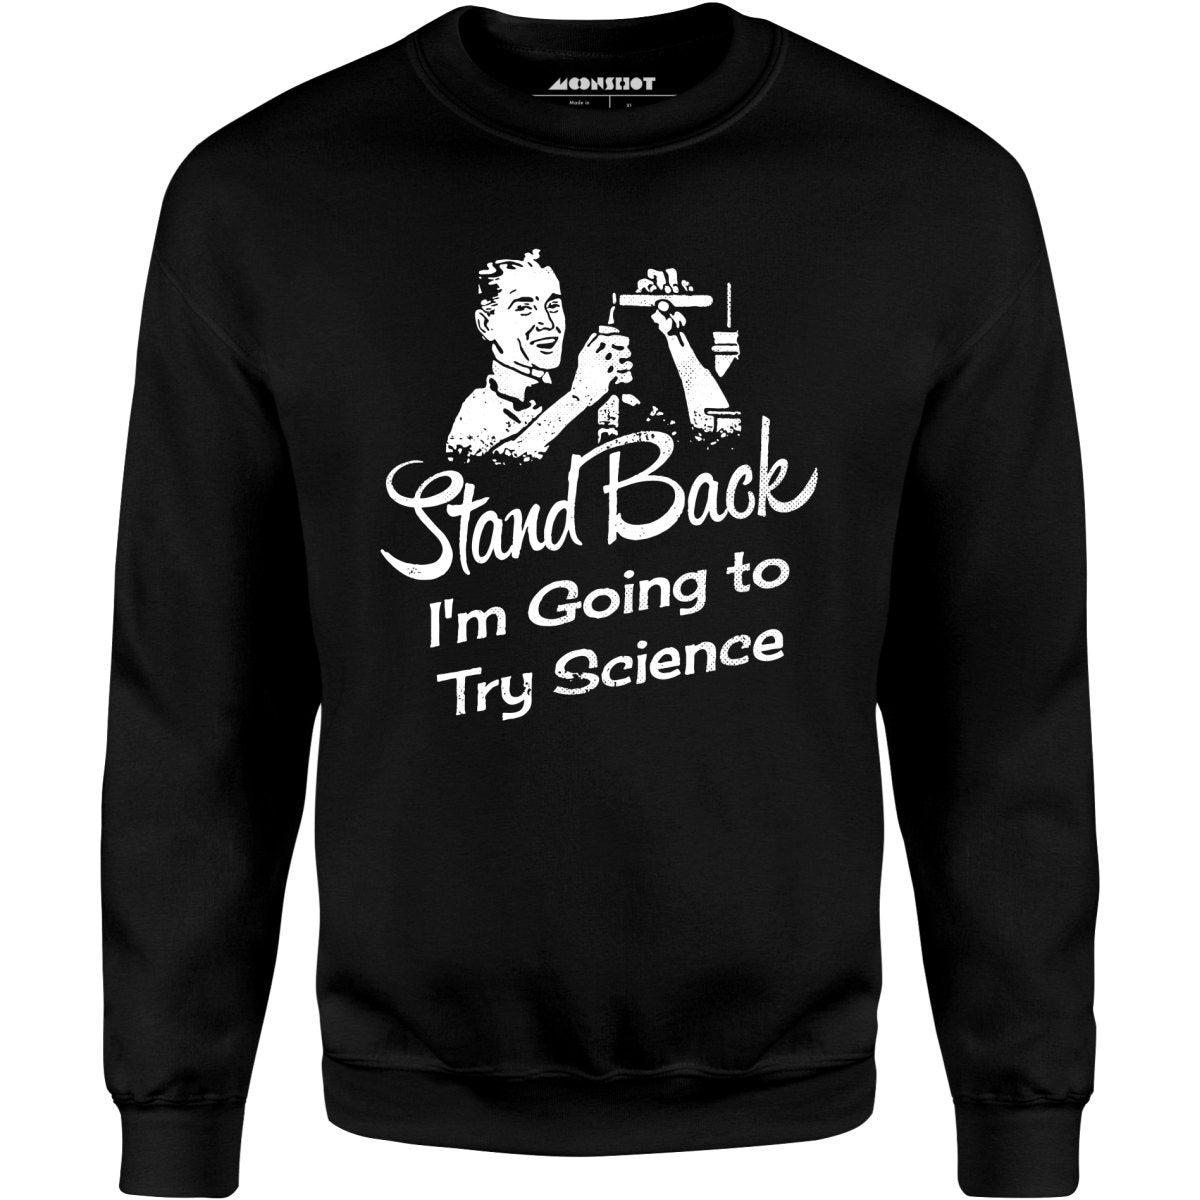 Stand Back I'm Going to Try Science - Unisex Sweatshirt